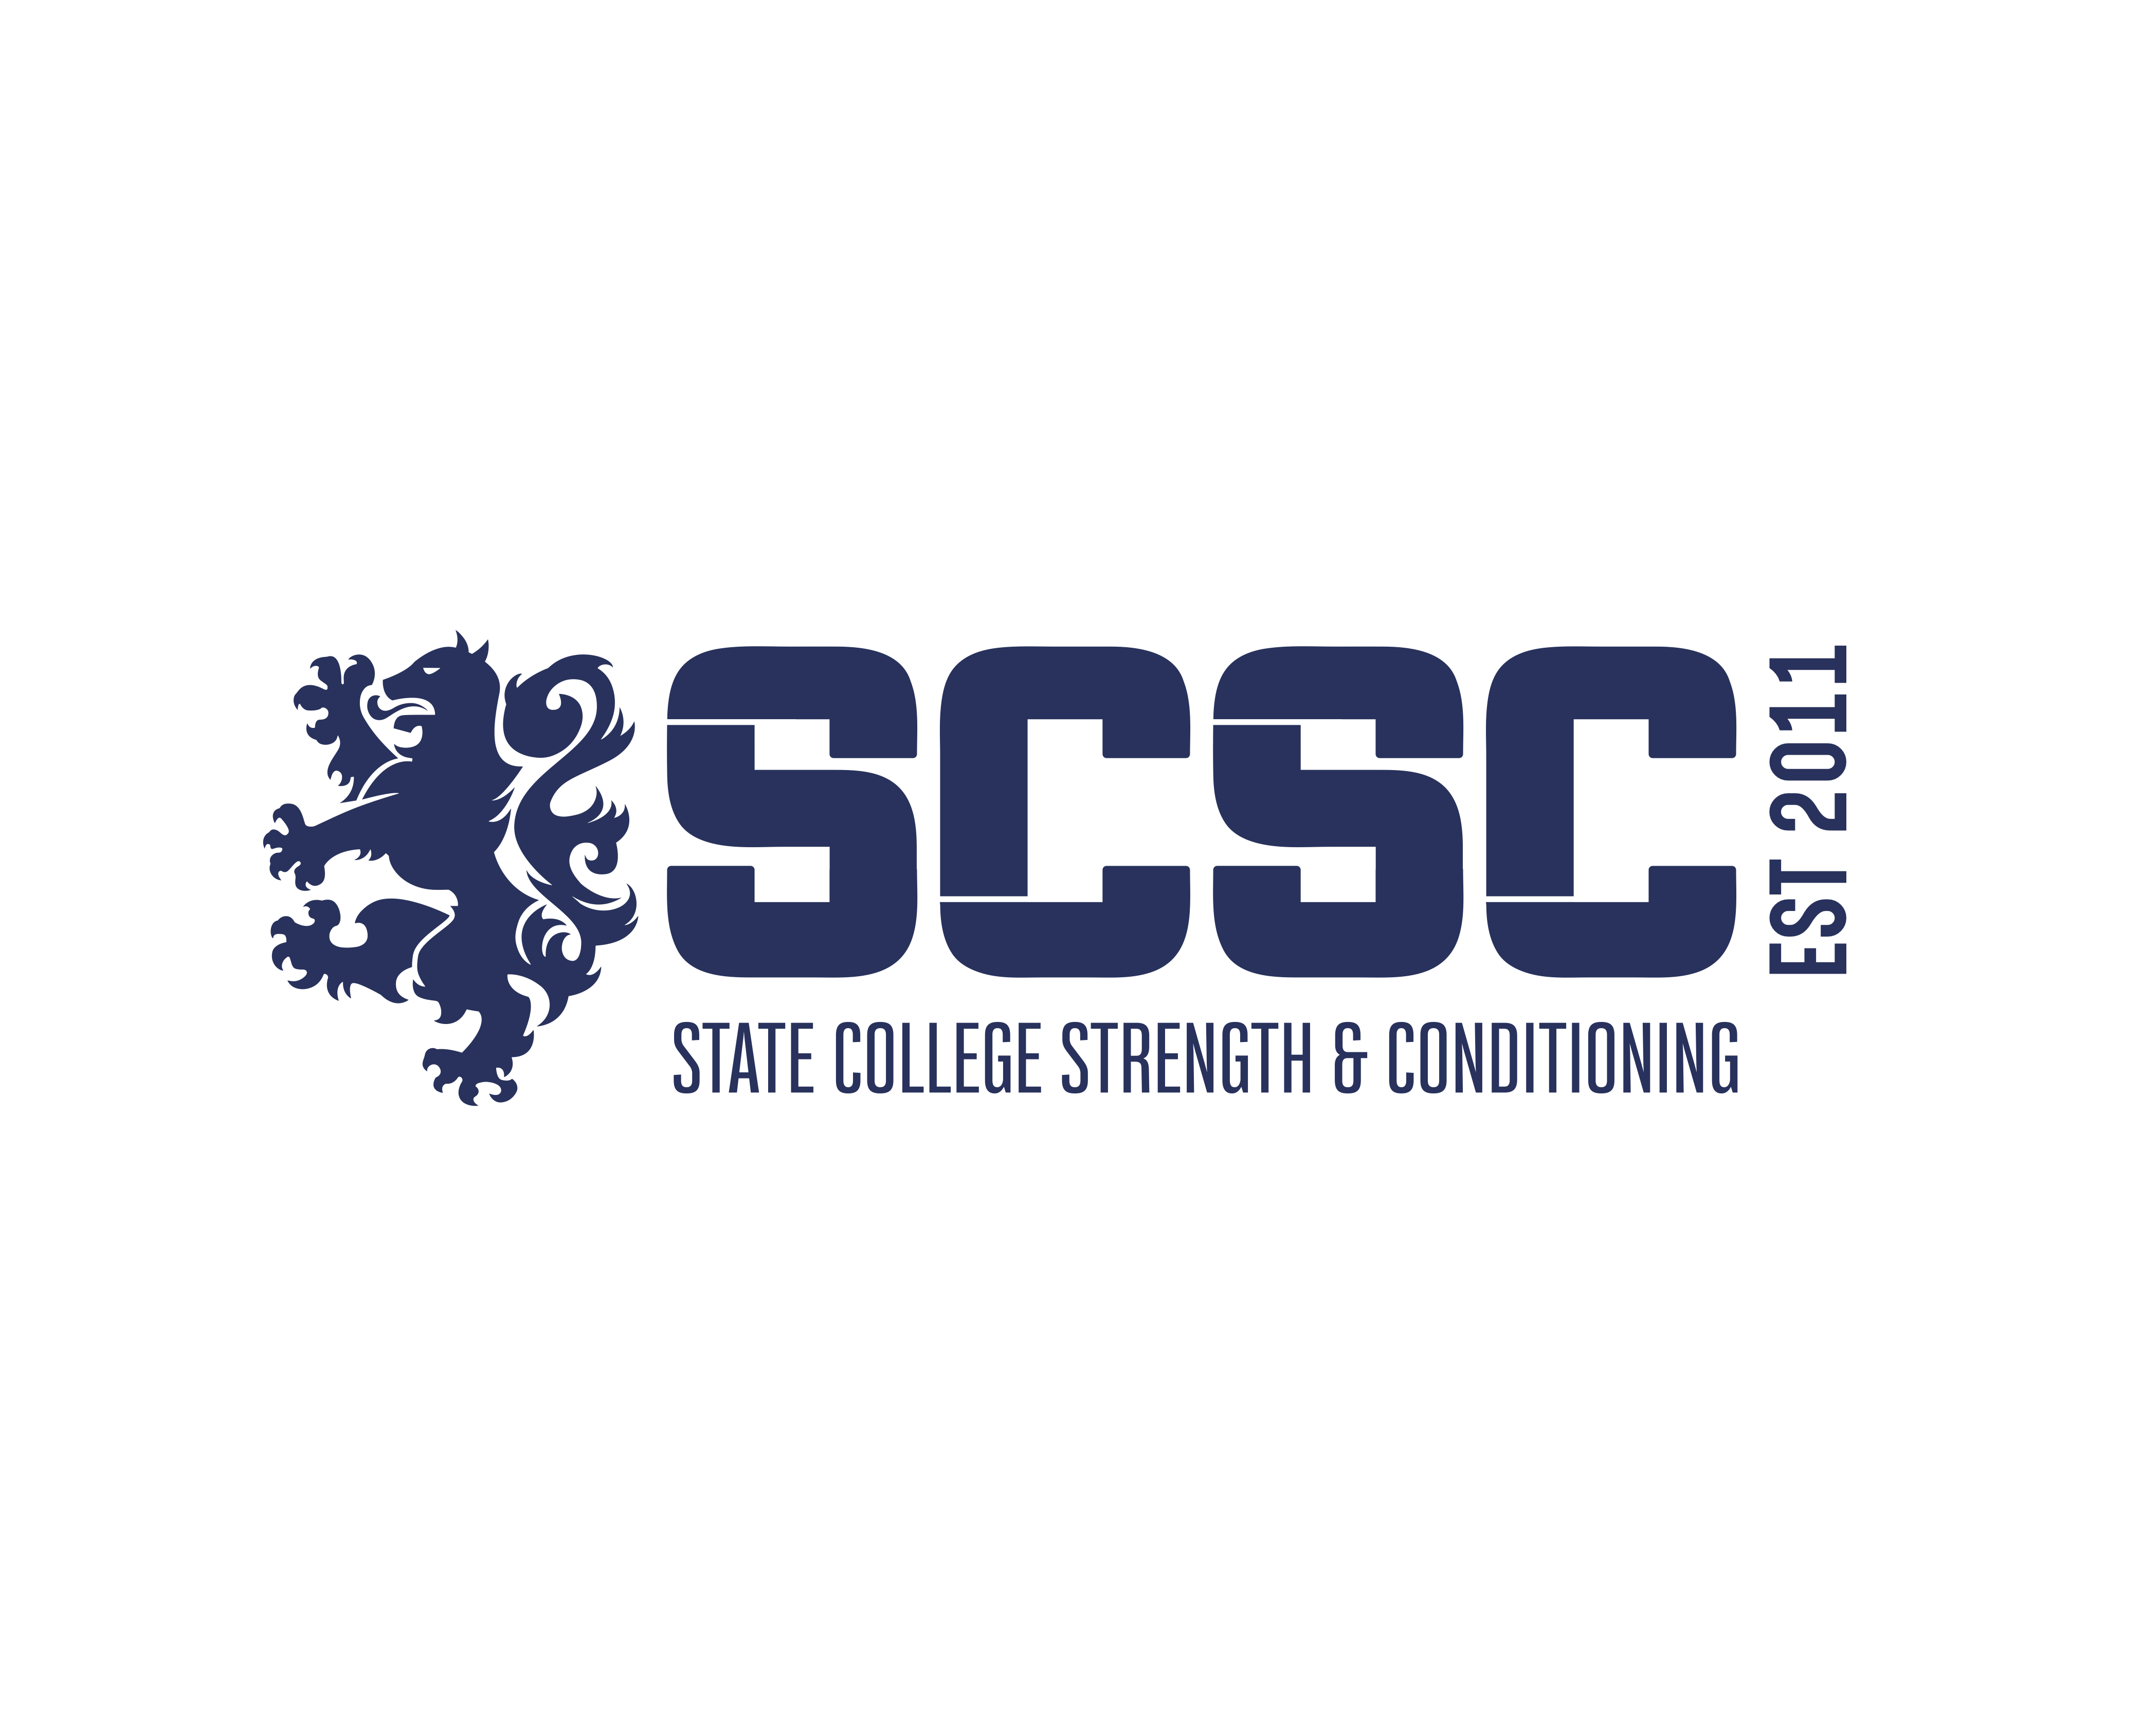 State College Strength & Conditioning logo